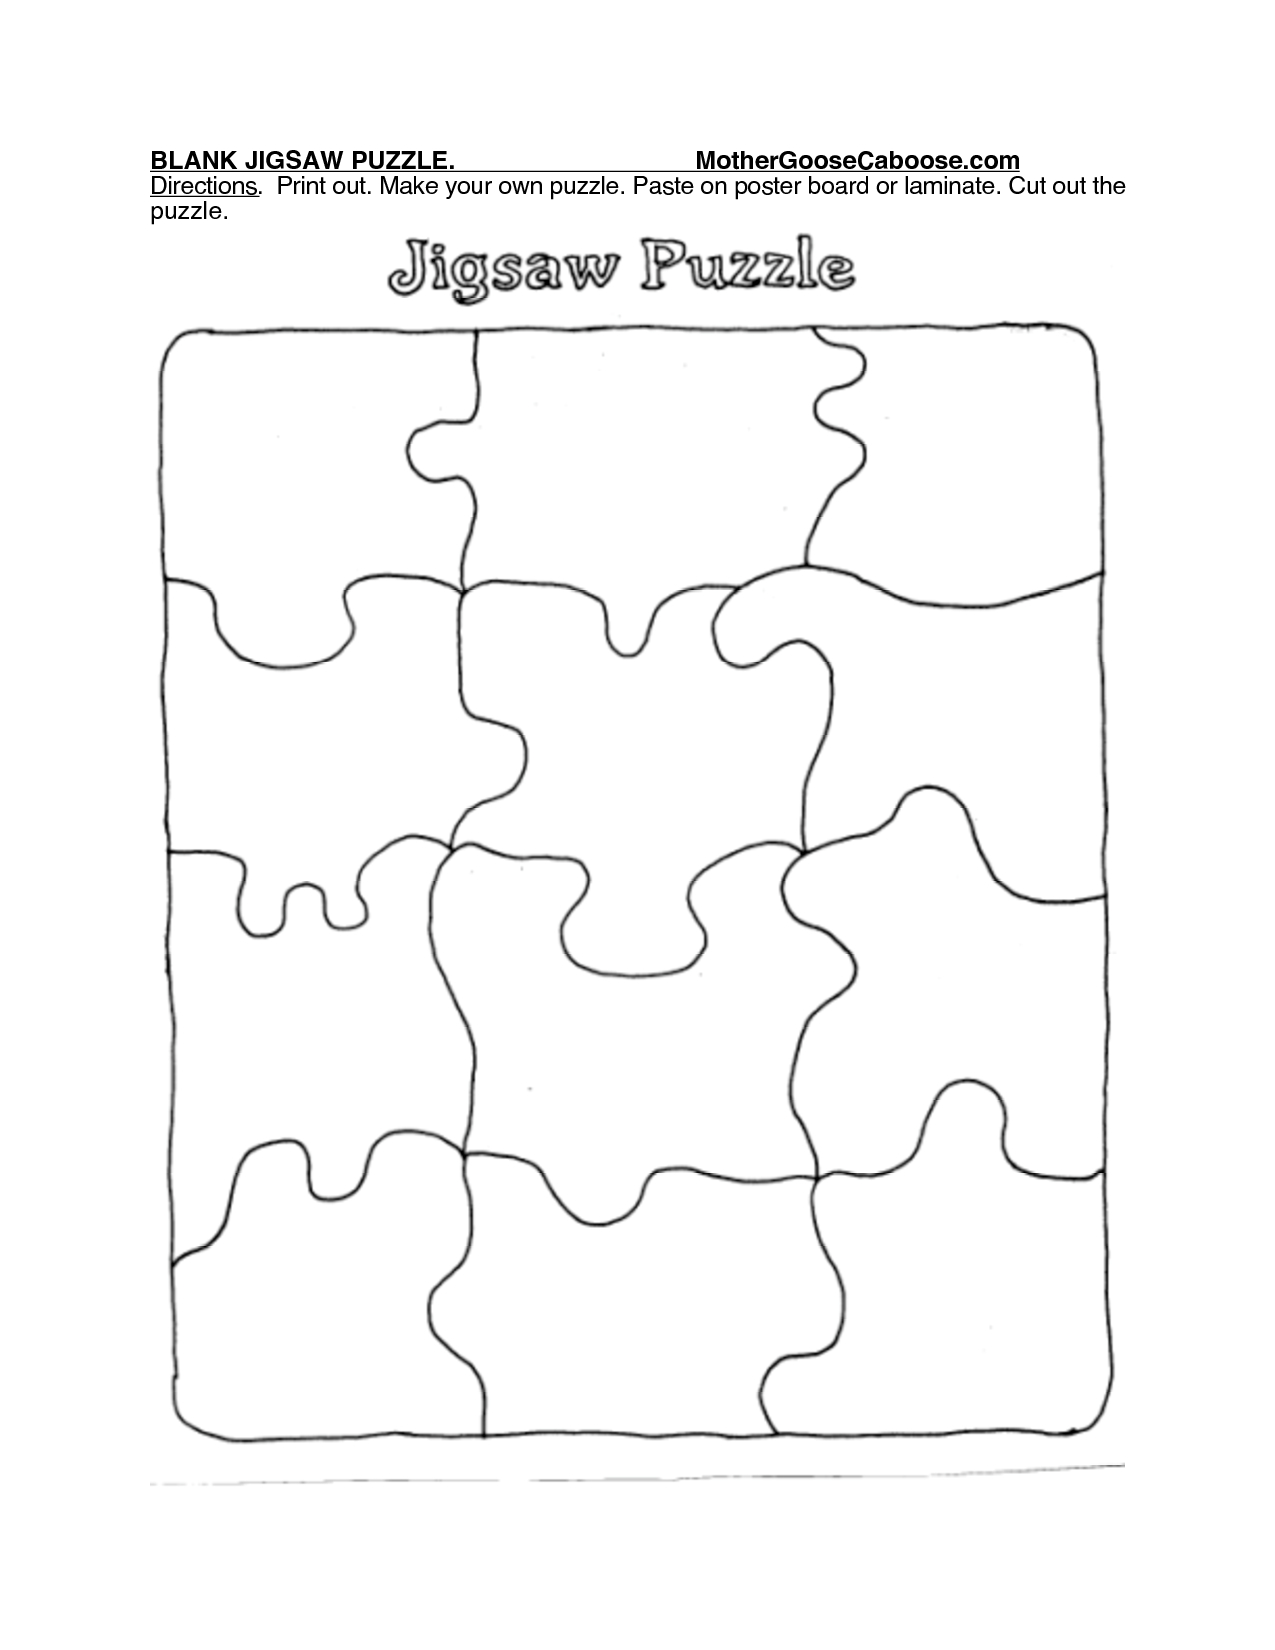 Printable Puzzle Piece Template | Search Results | New Calendar - Printable Jigsaw Puzzles Pieces